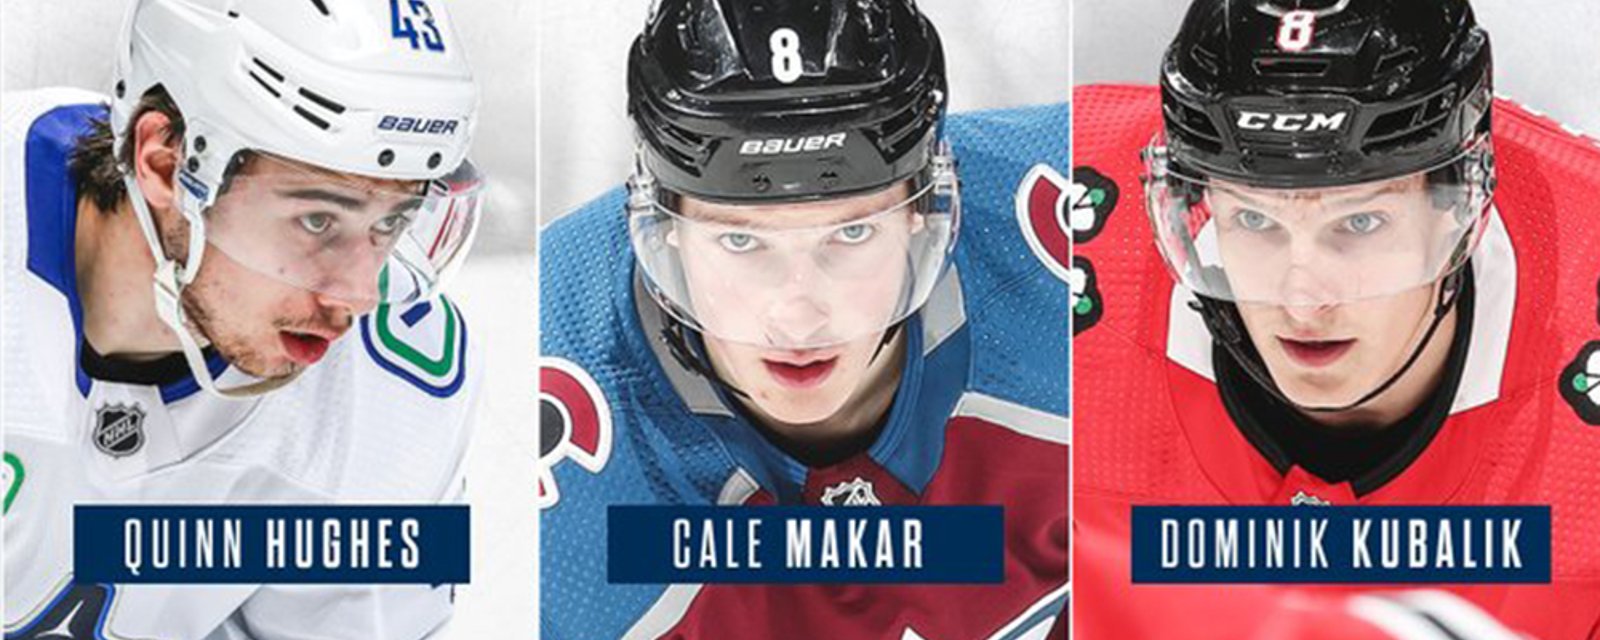 Makar edges out Hughes to win the 2020 Calder Trophy